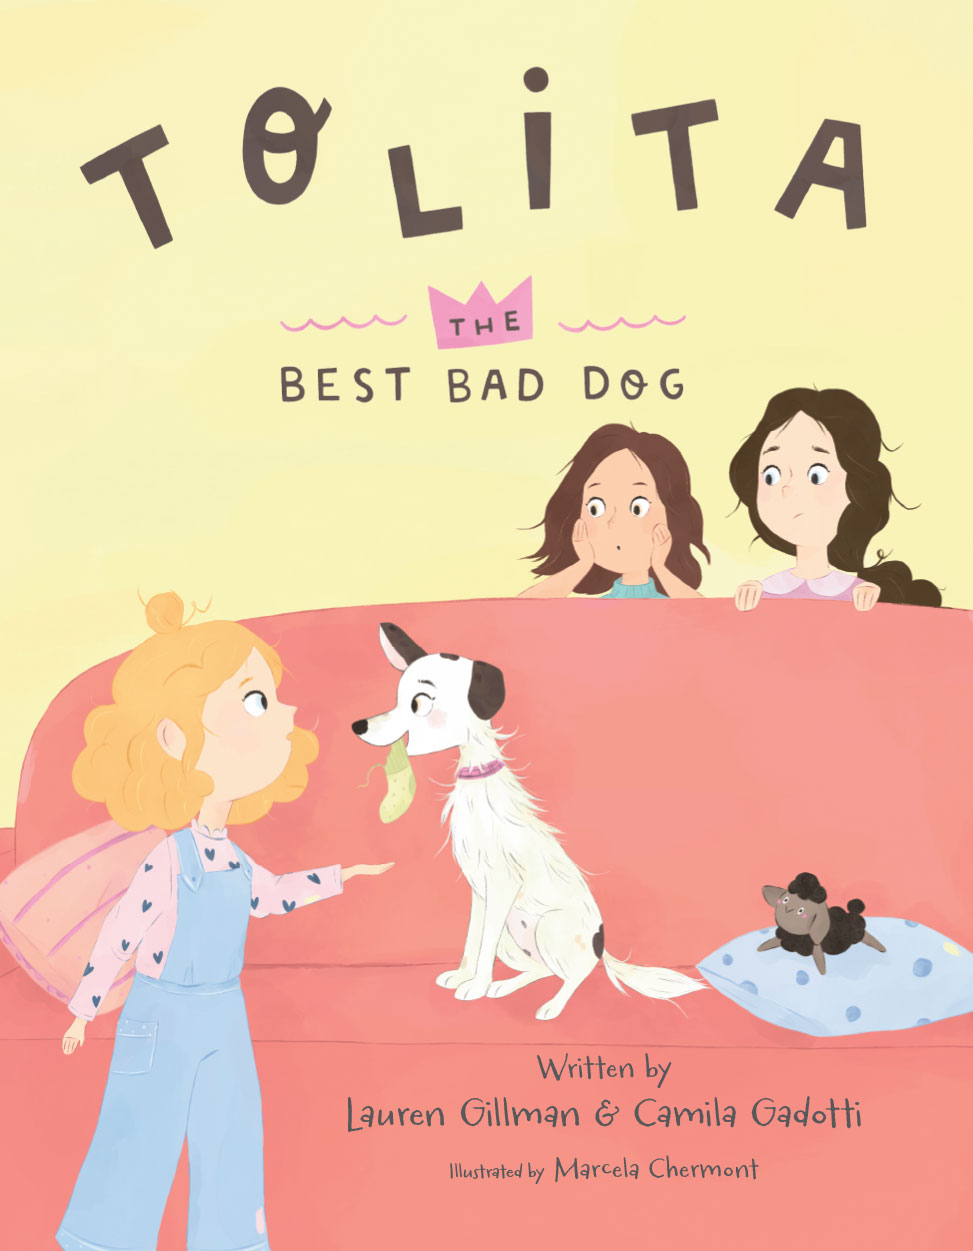 Tolita: The Best Bad Dog by Lauren Gillman and Camila Gadotti Book Cover